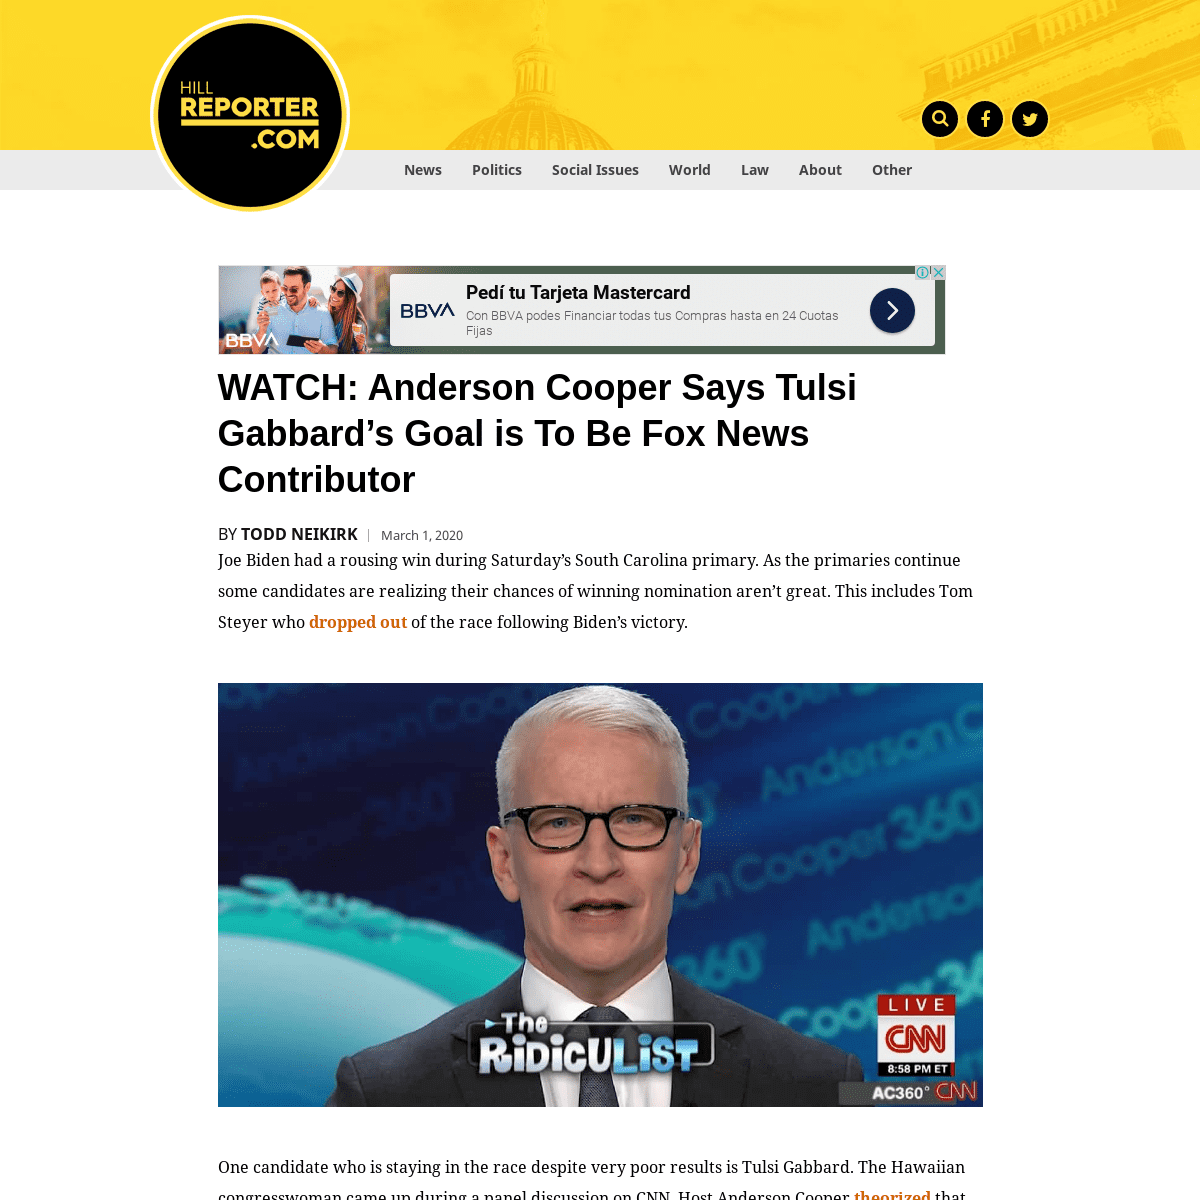 A complete backup of hillreporter.com/watch-anderson-cooper-says-tulsi-gabbards-goal-is-to-be-fox-news-contributor-59692